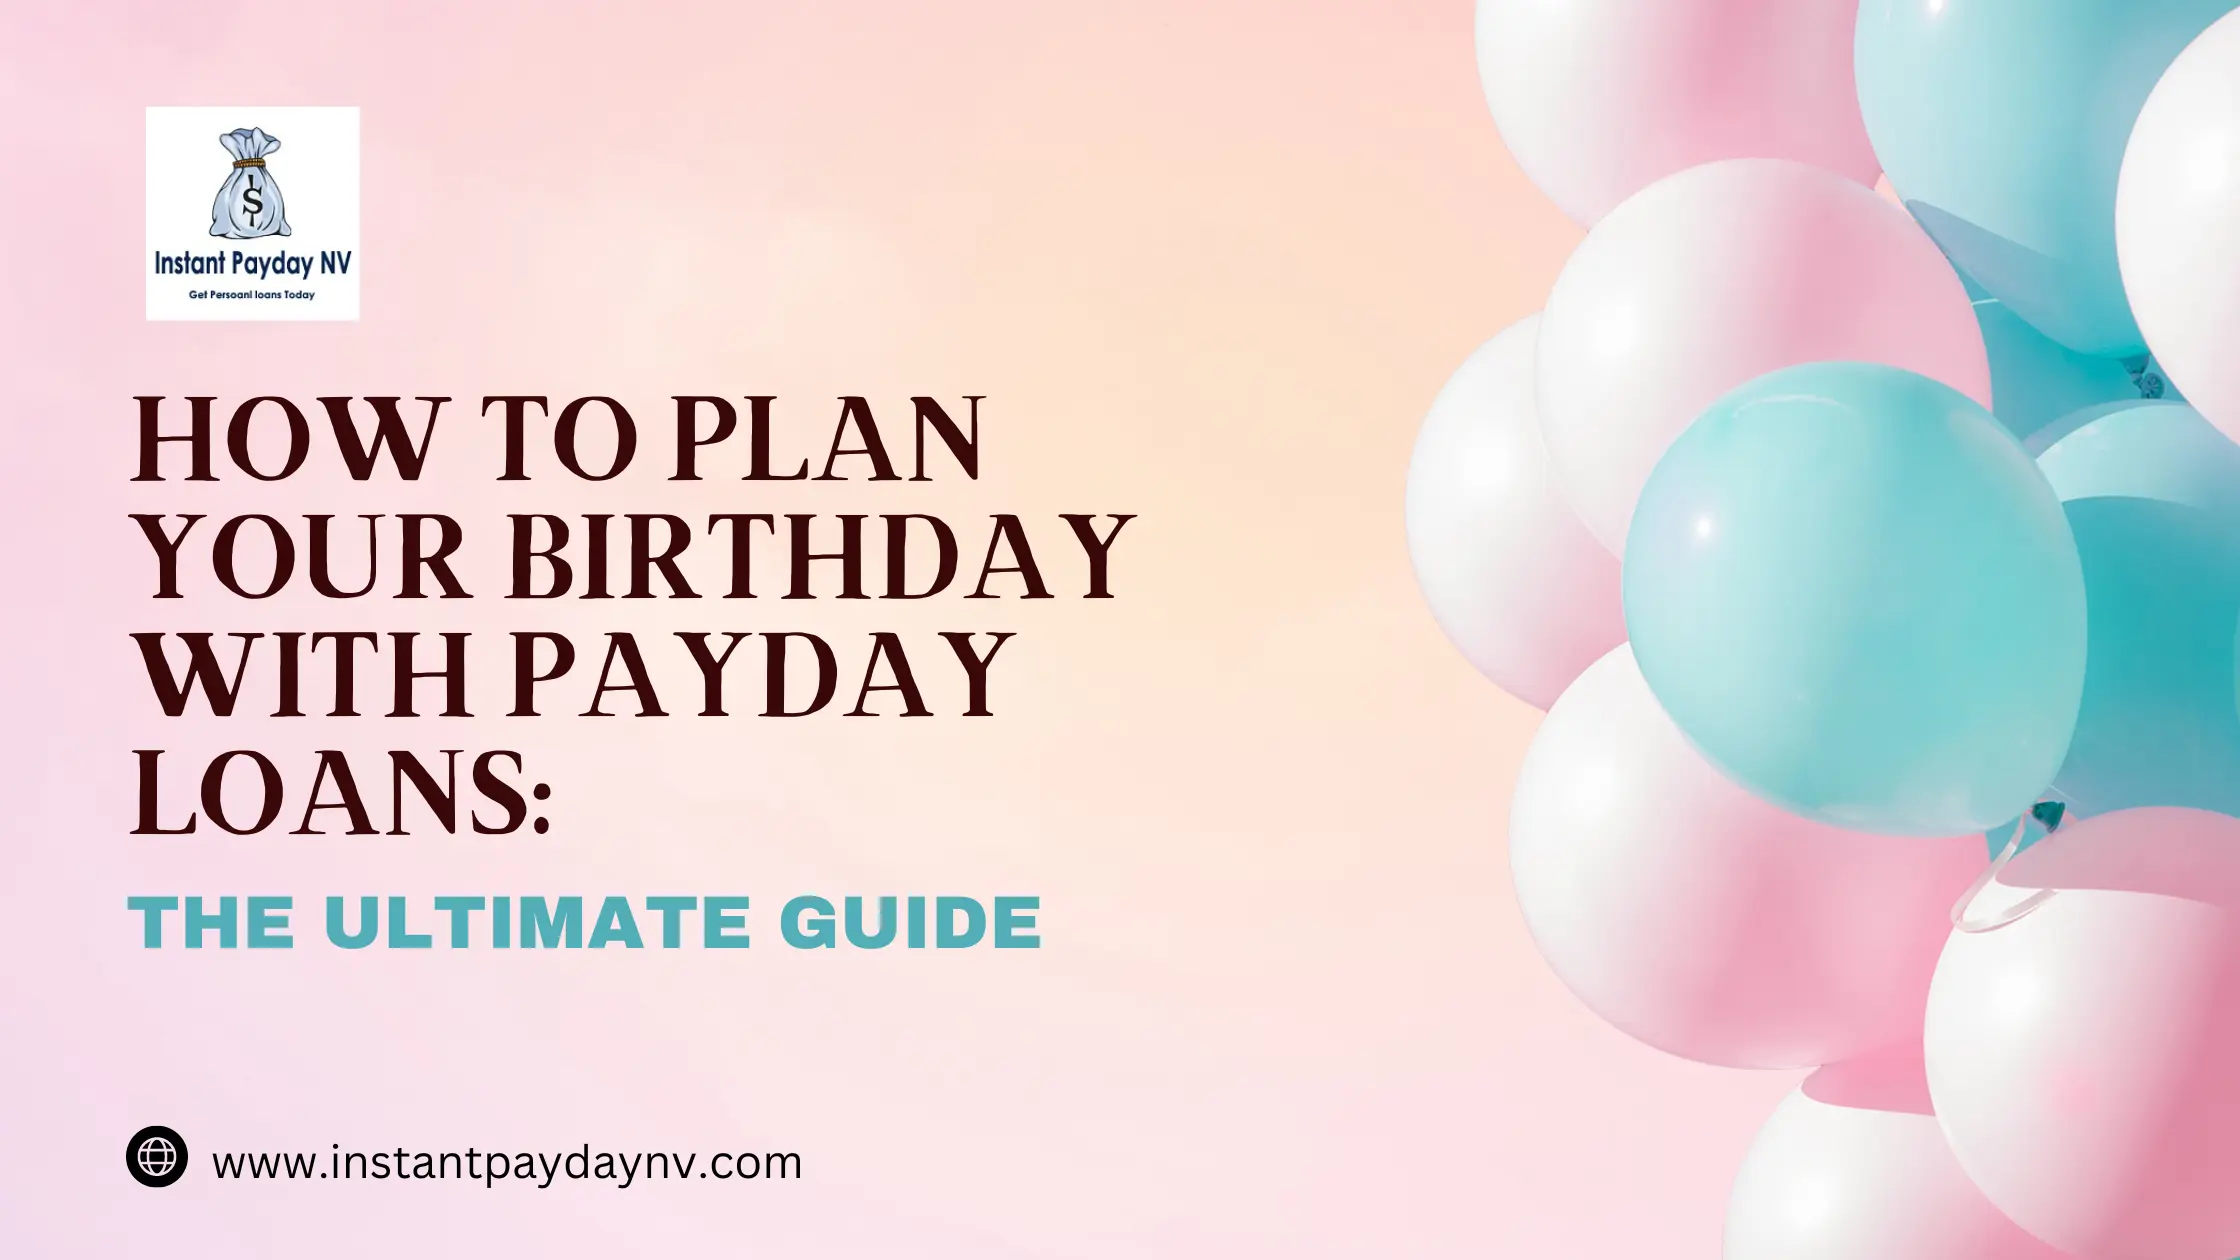 How to Plan Your Birthday with Payday Loans